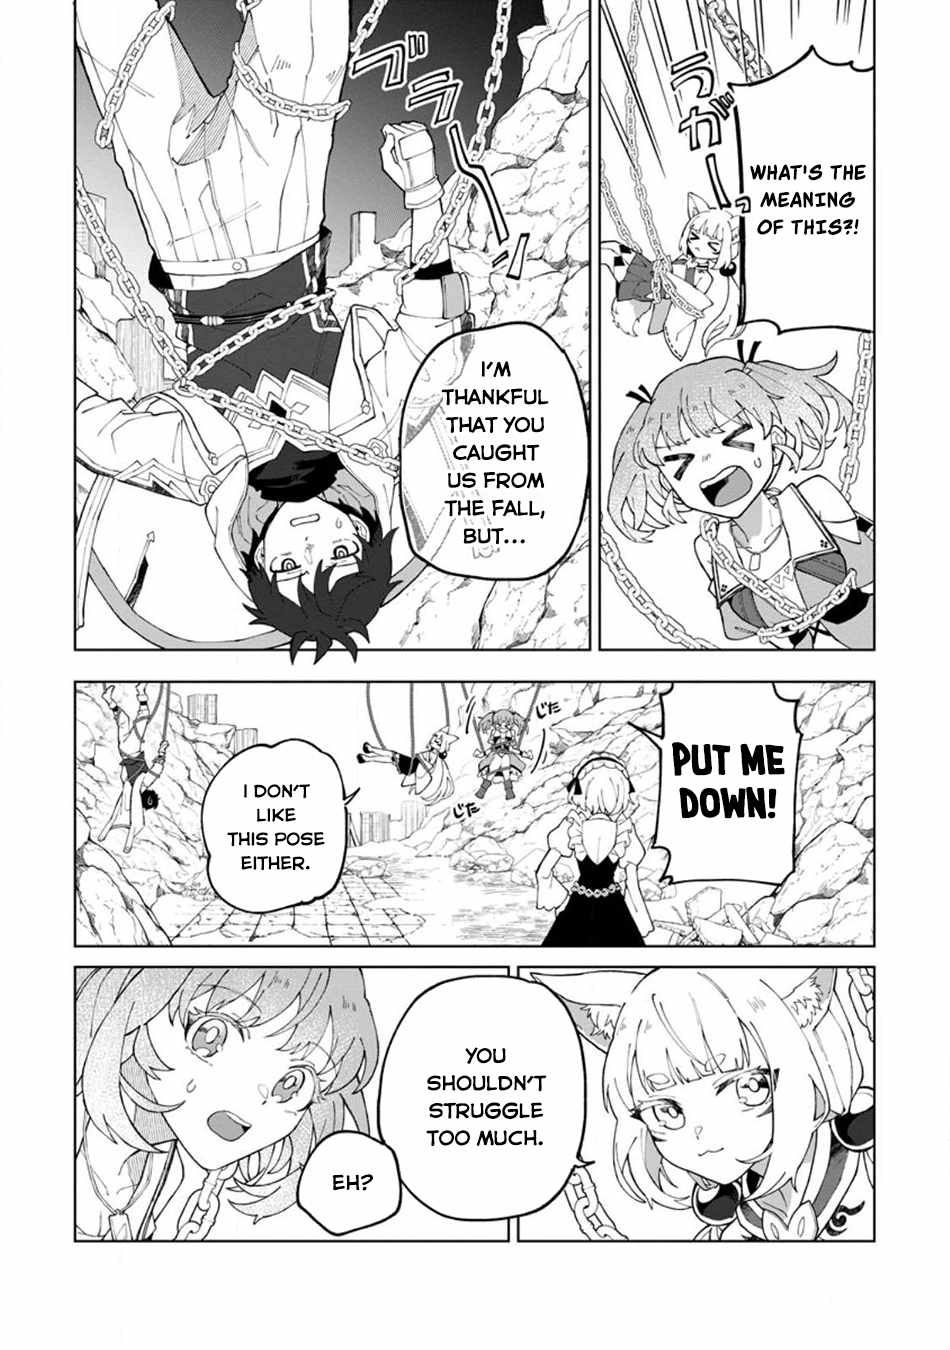 The White Mage Who Was Banished From The Hero's Party Is Picked Up By An S Rank Adventurer~ This White Mage Is Too Out Of The Ordinary! - 25 page 3-27869227